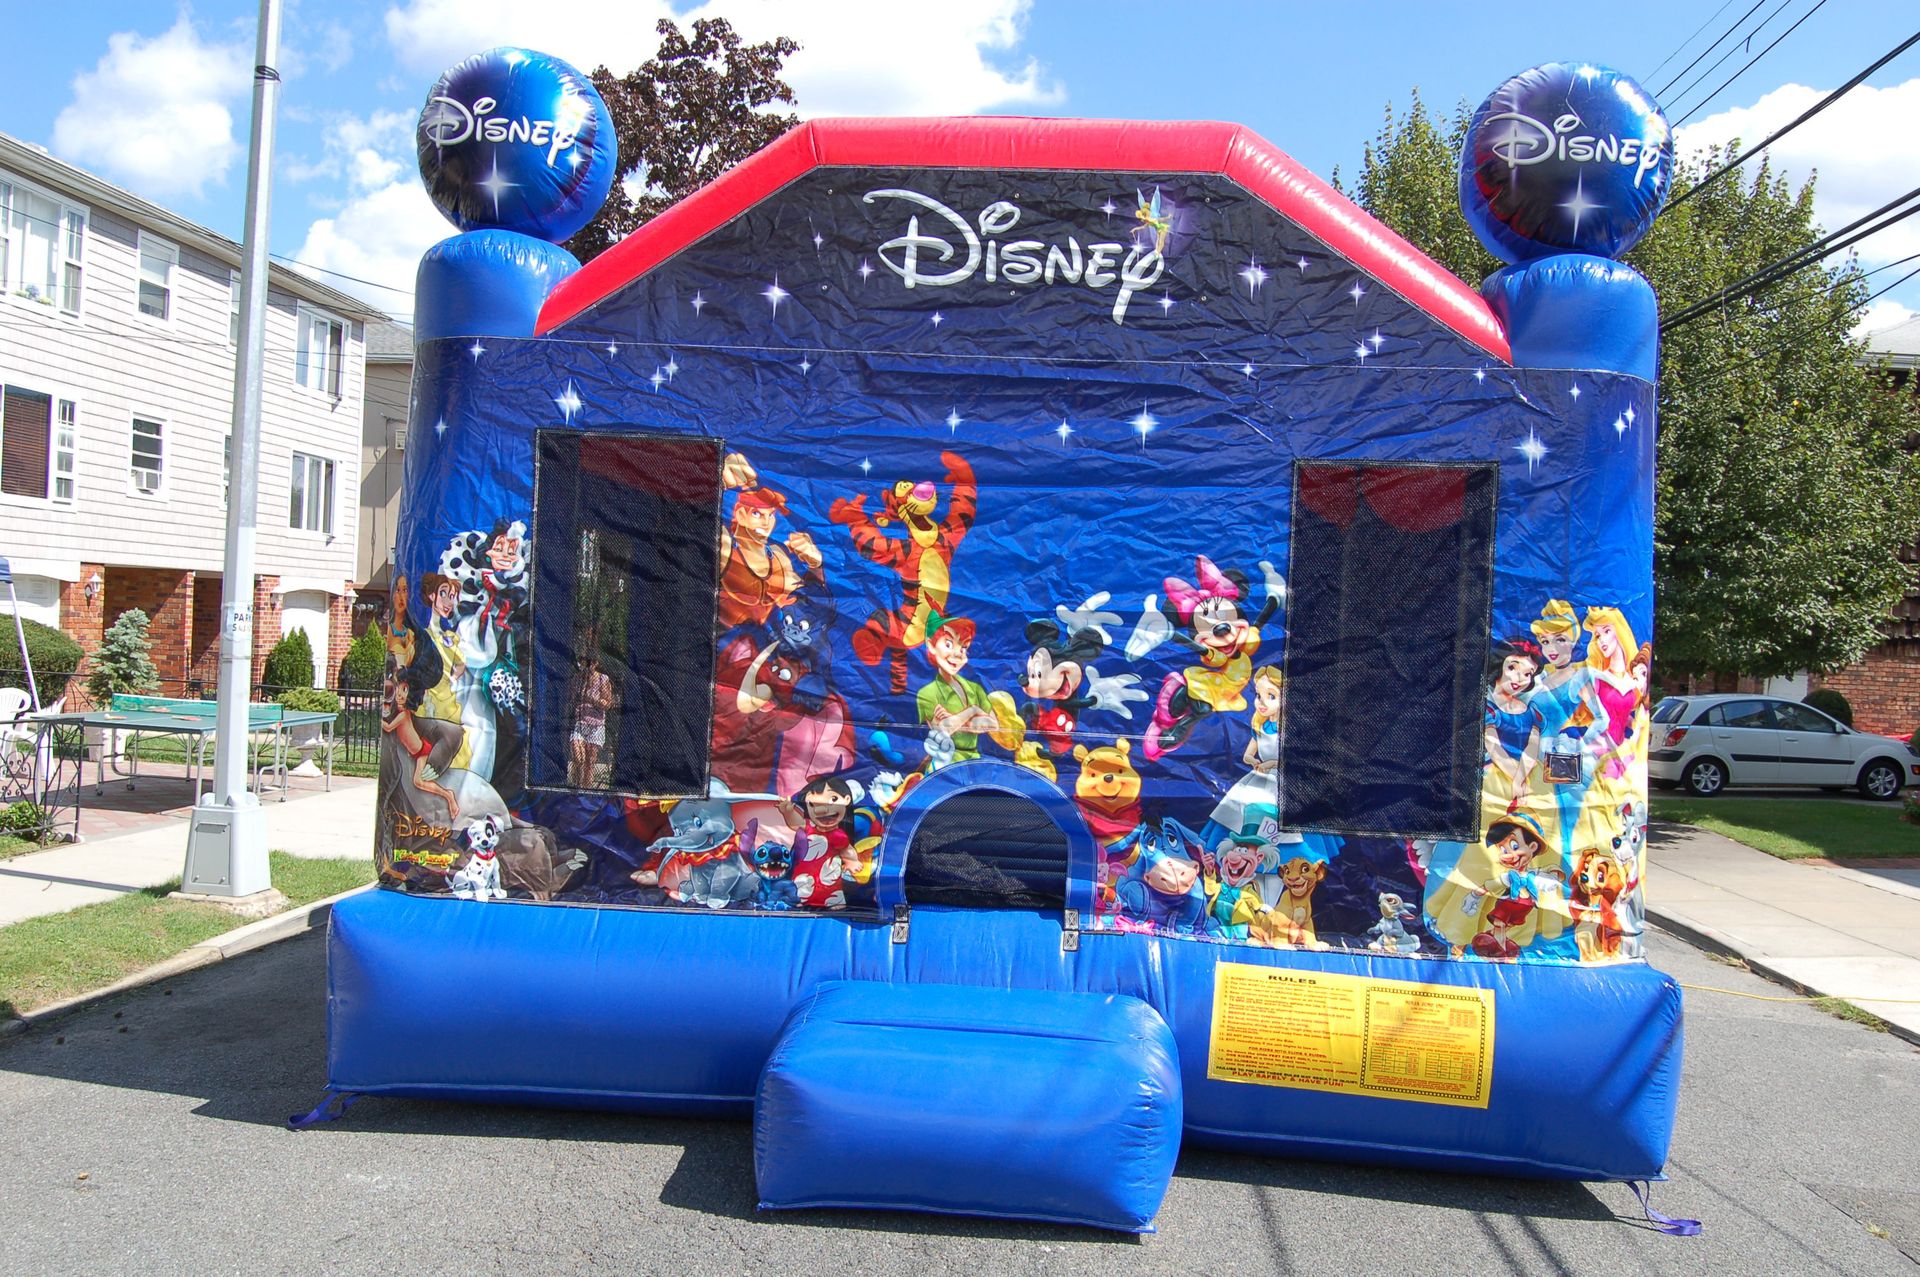 Disney Character Bounce House Inflatable 15' x 15' .  This is amazing fun for all ages, with Mickey, Minnie, Pooh, Tigger, Snow White, the gangs all here for a day of fun.